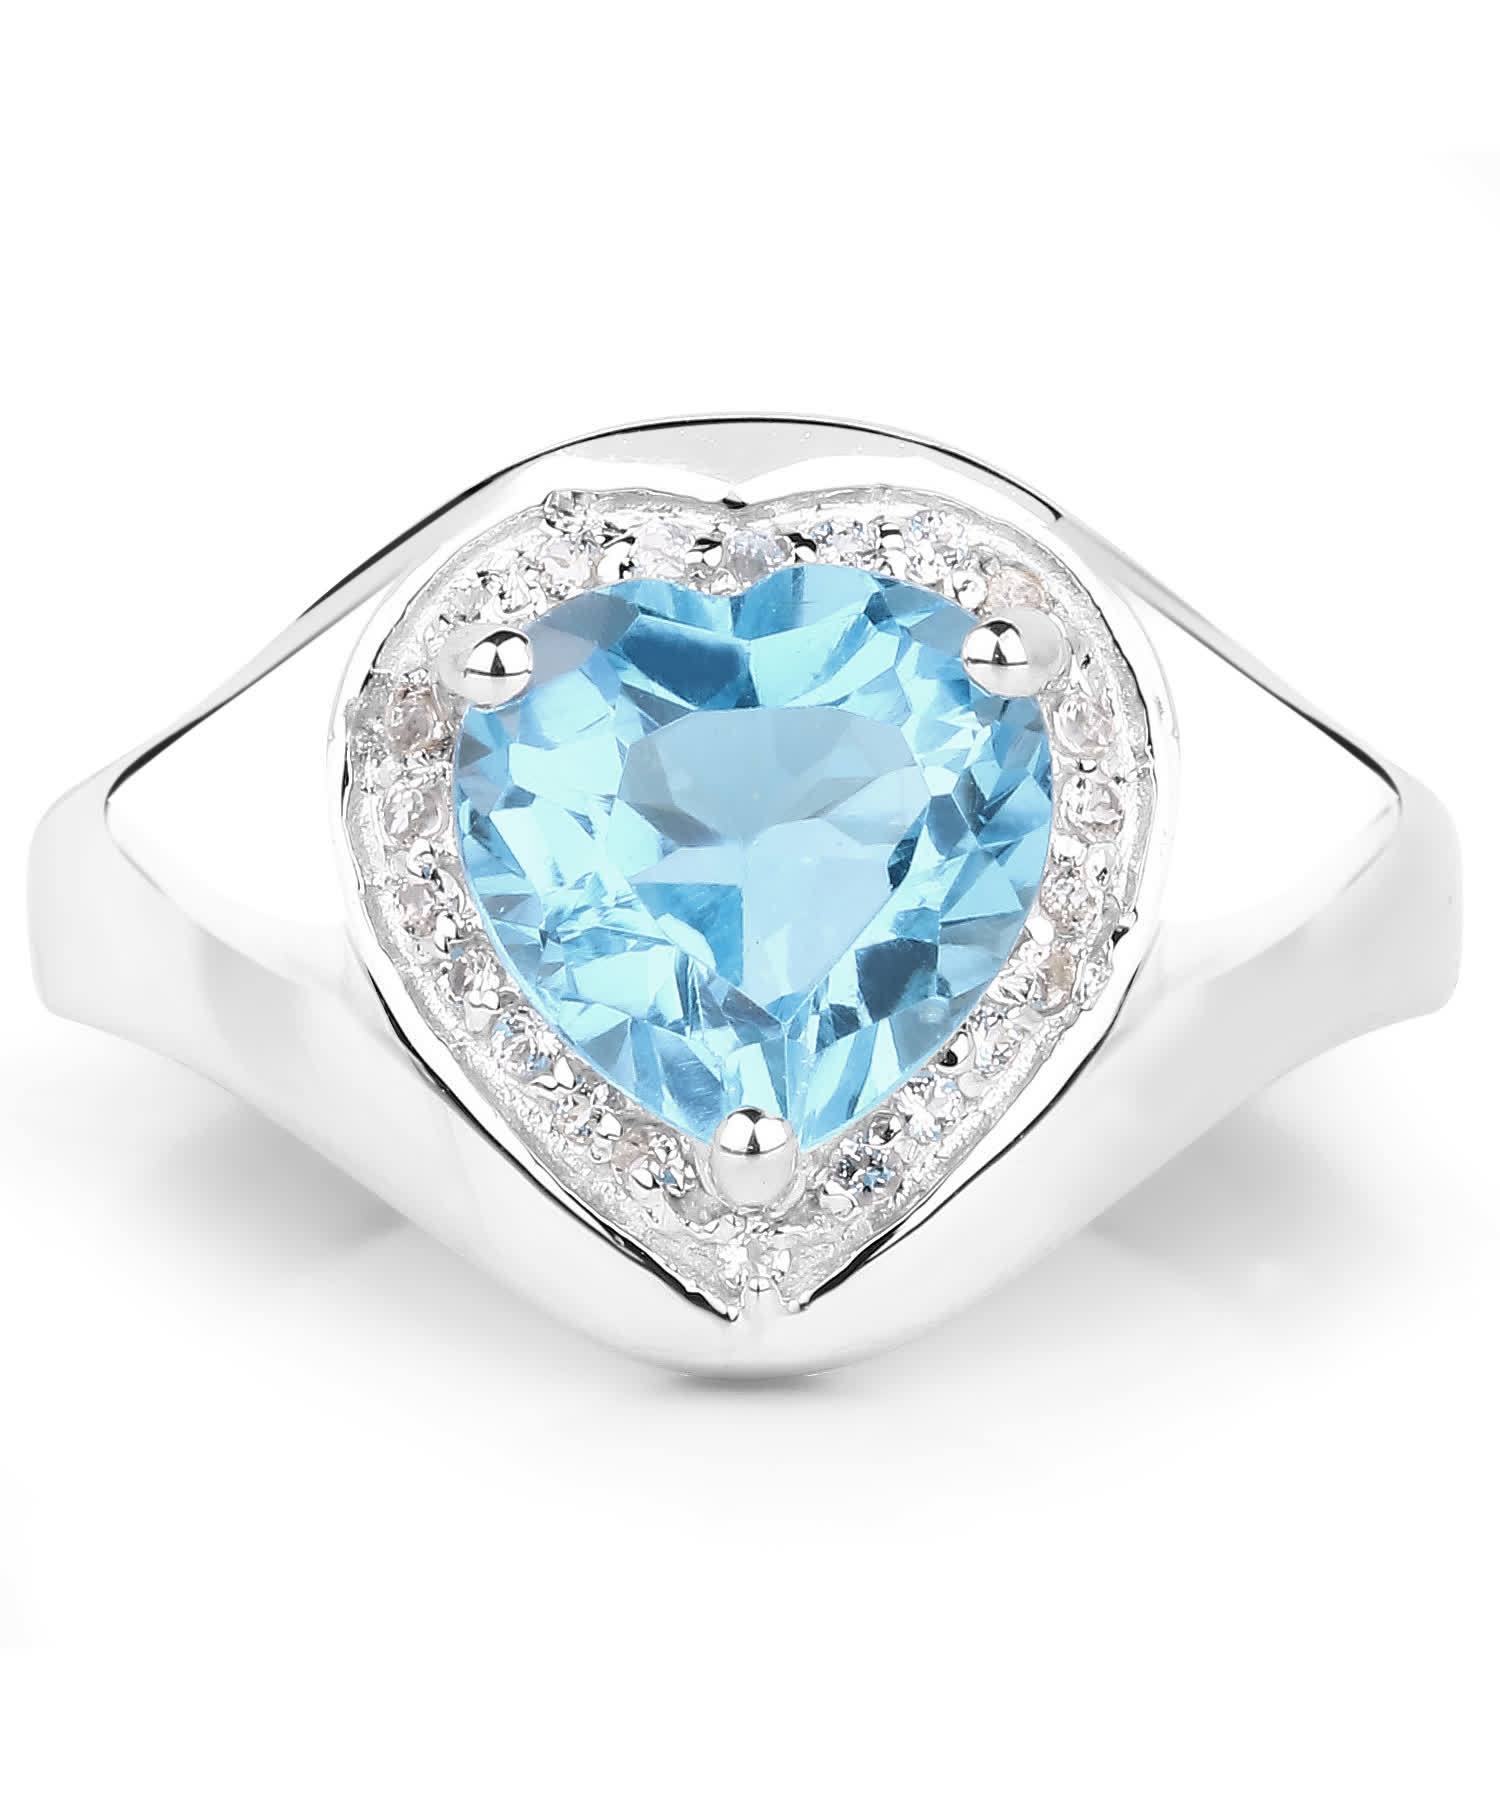 2.47ctw Natural Swiss Blue Topaz Rhodium Plated 925 Sterling Silver Heart Right Hand Ring View 3